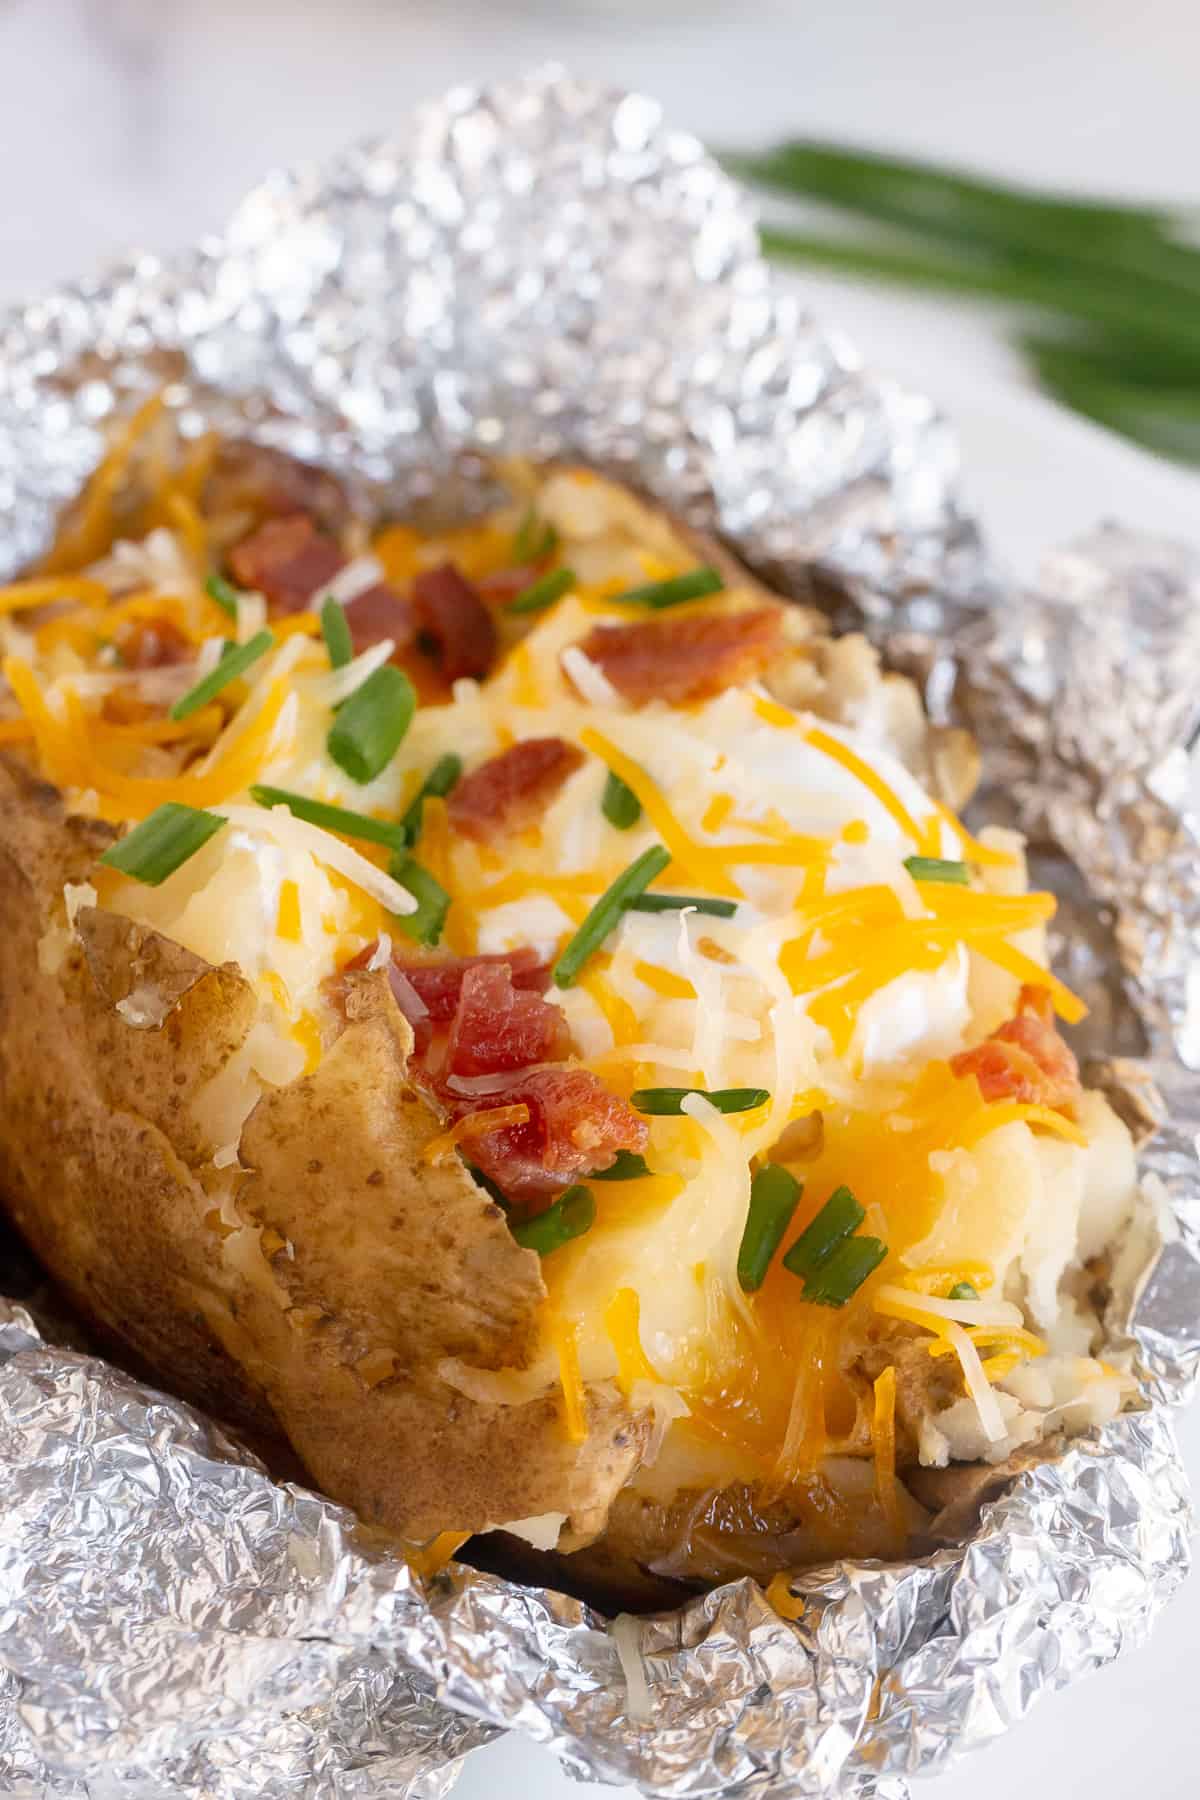 A baked potato topped with cheese, sour cream, and bacon on top of foil.